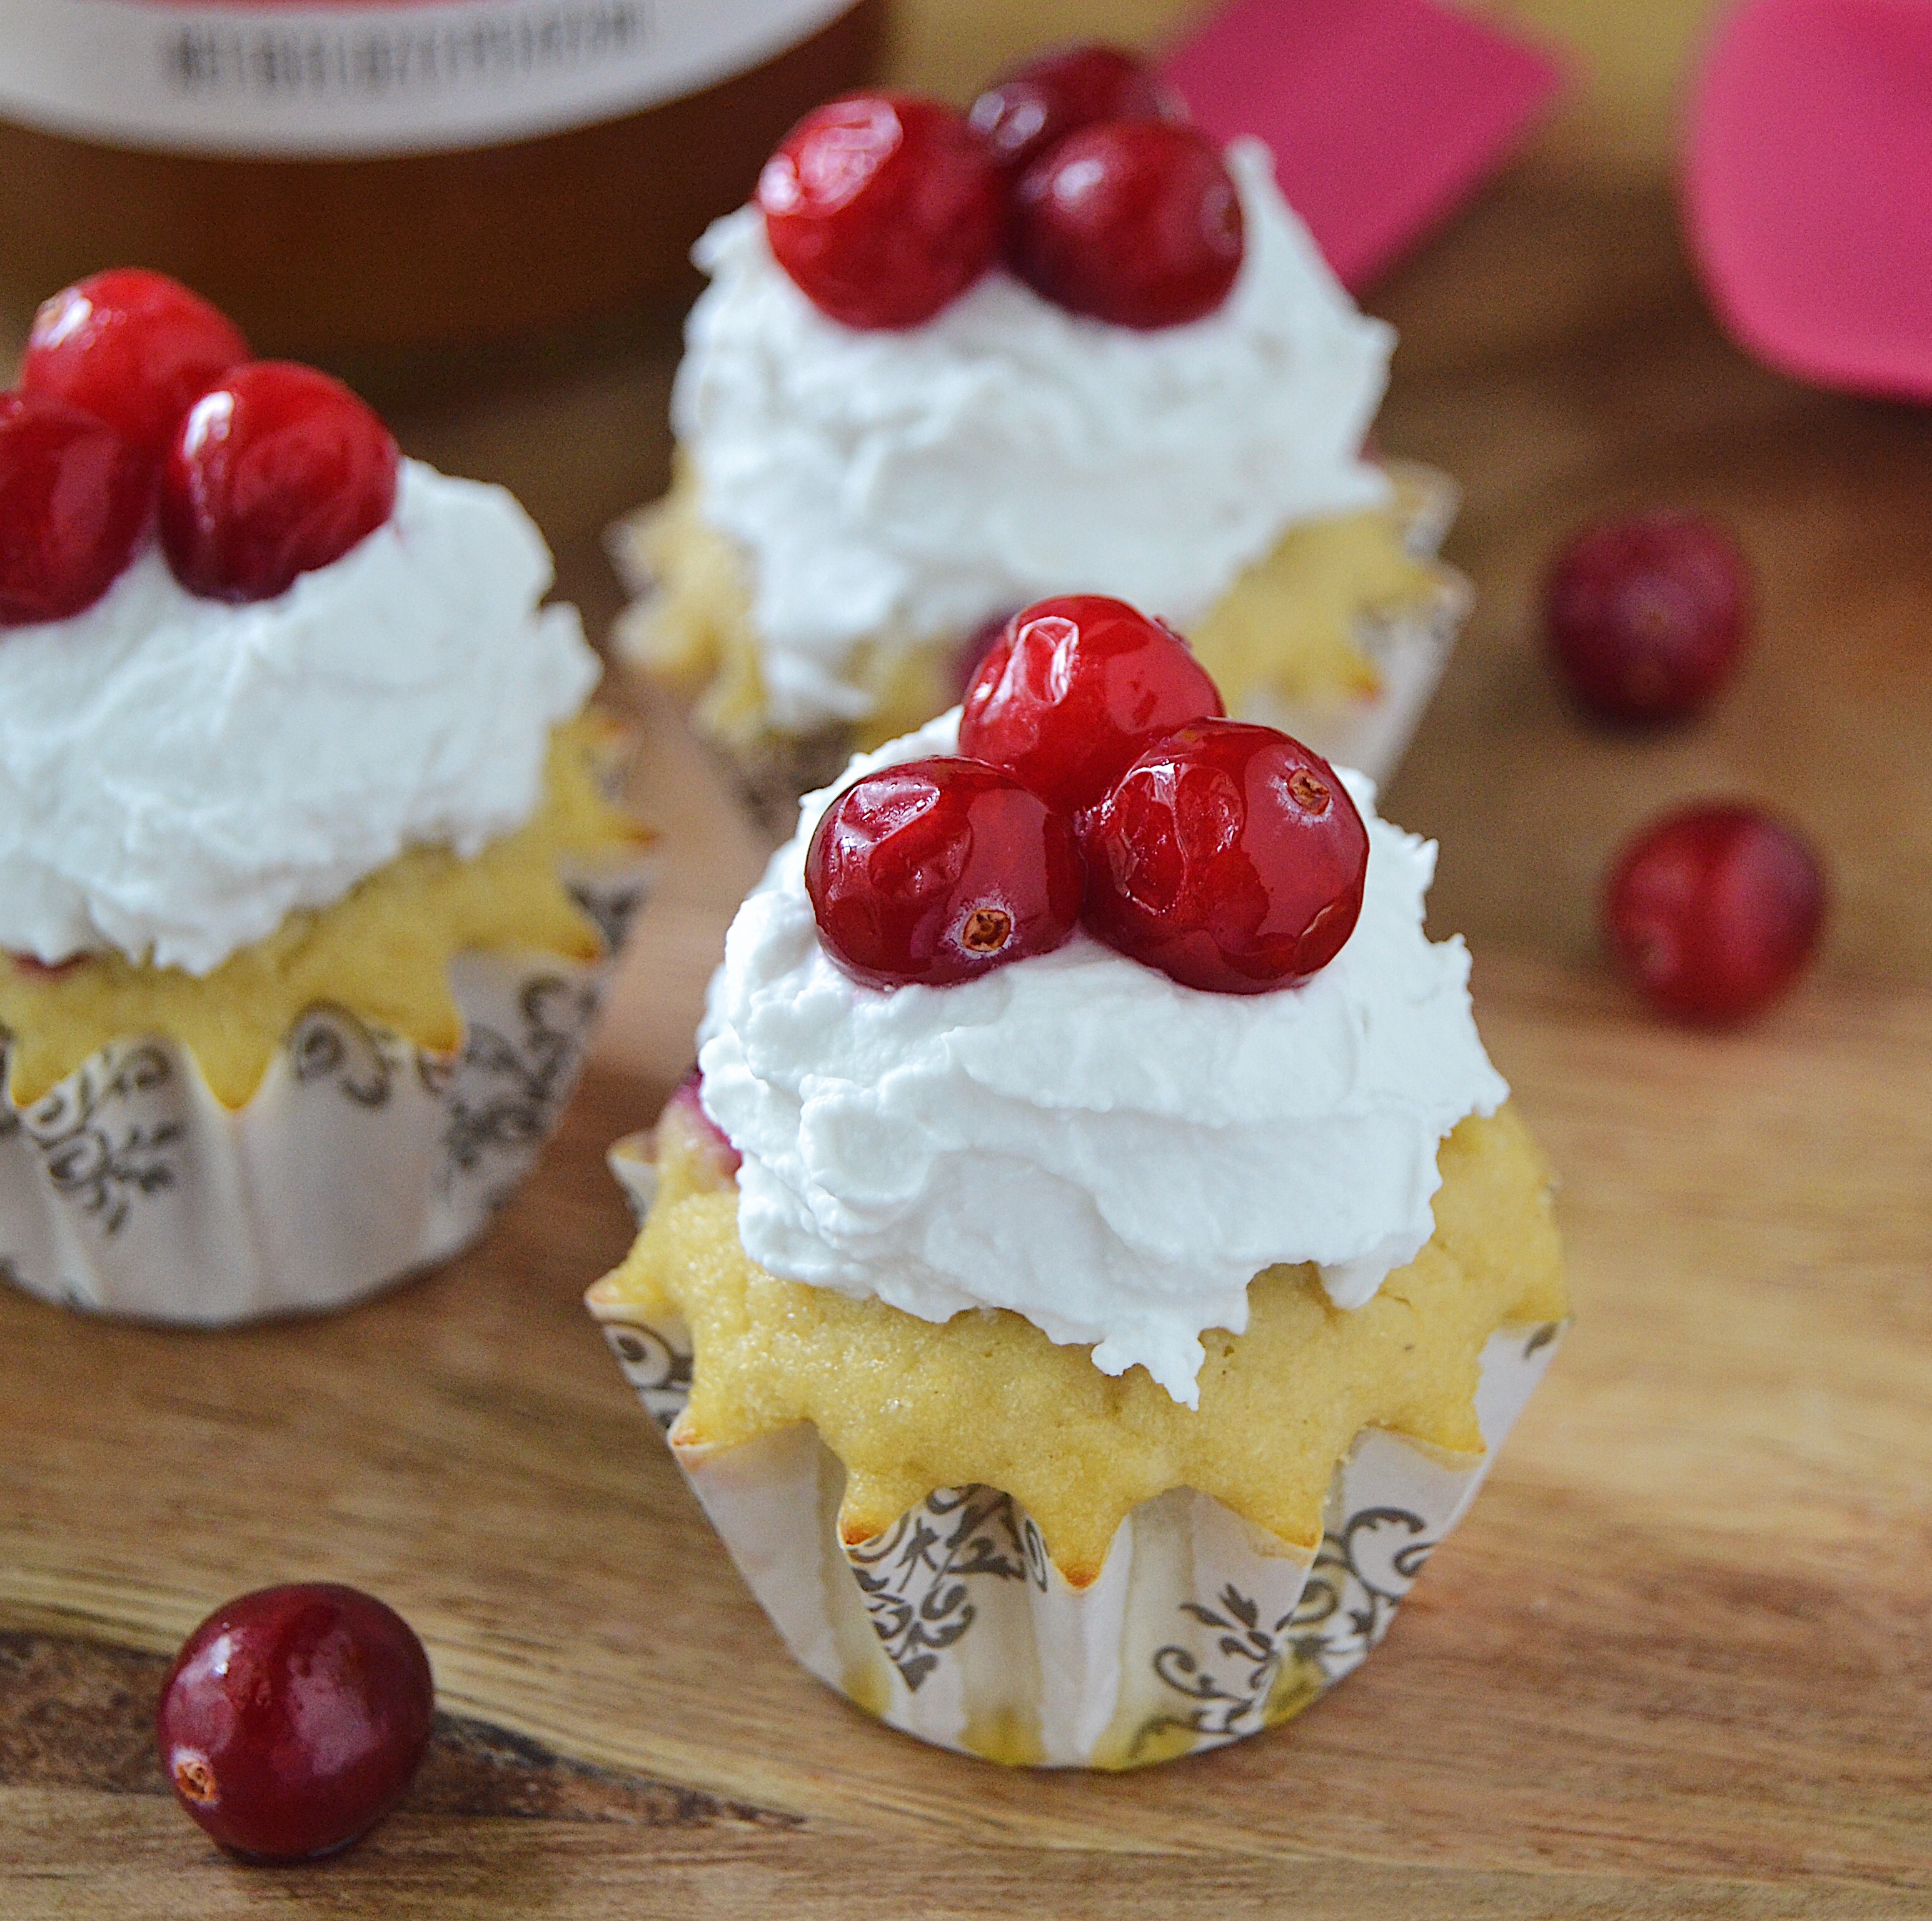 Apple Cider & Cranberry Pupcakes for the dog you love to spoil